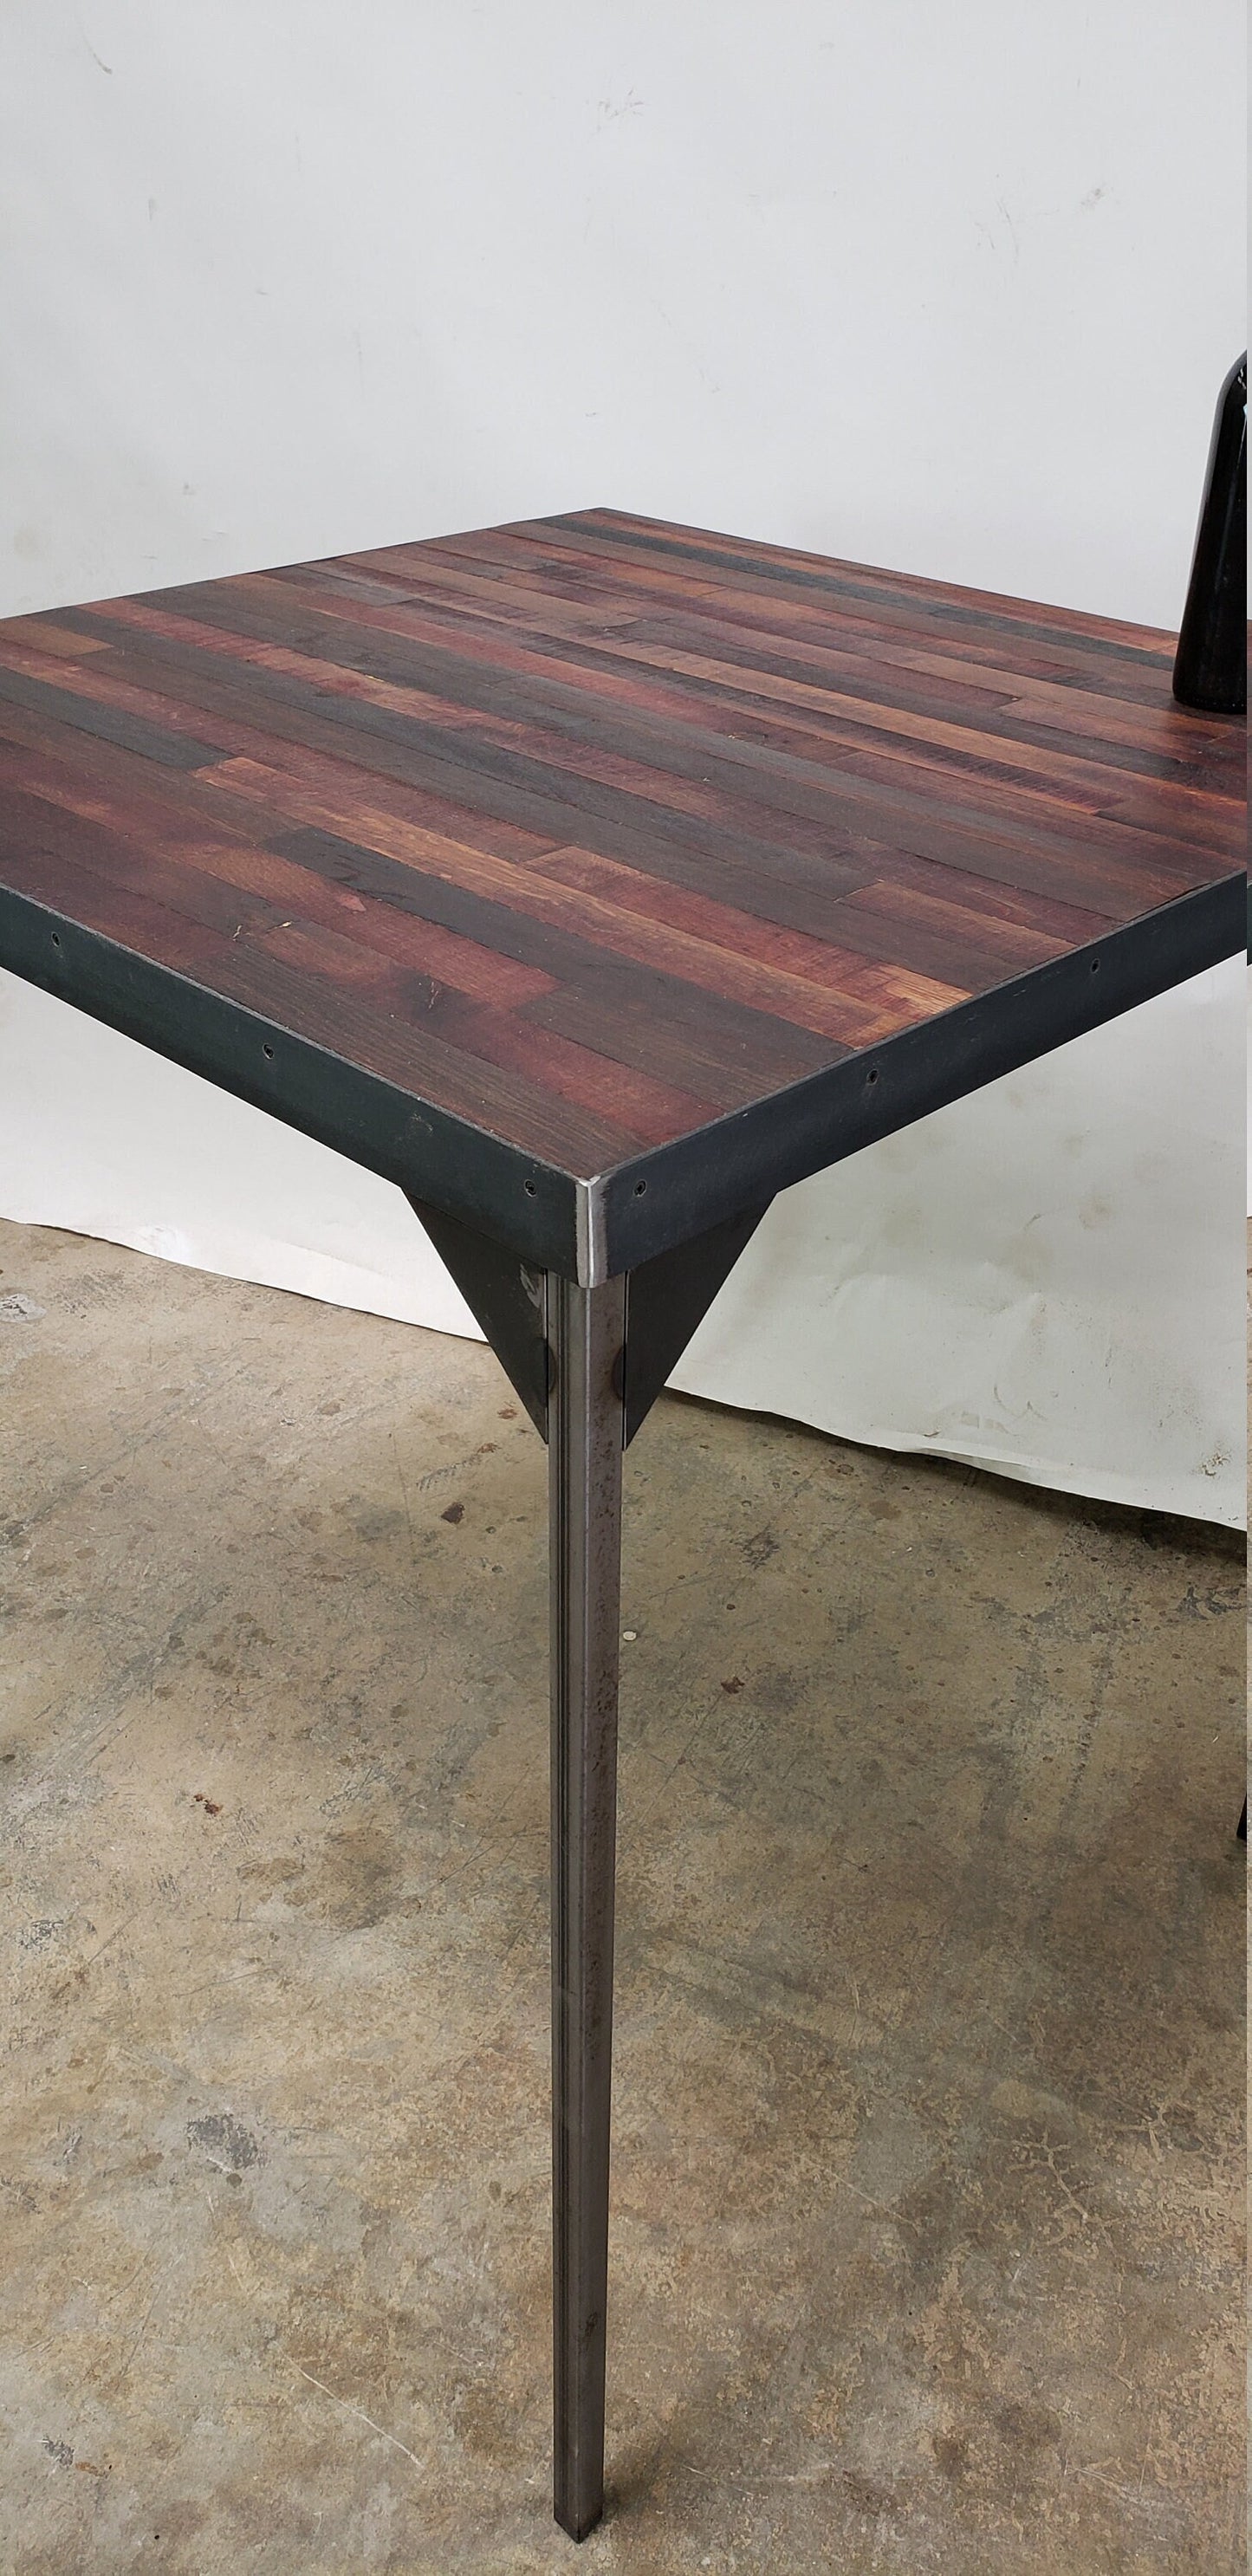 Wine Barrel Pub or Tasting Table - Viriti - Made from retired wine barrels. 100% Recycled!